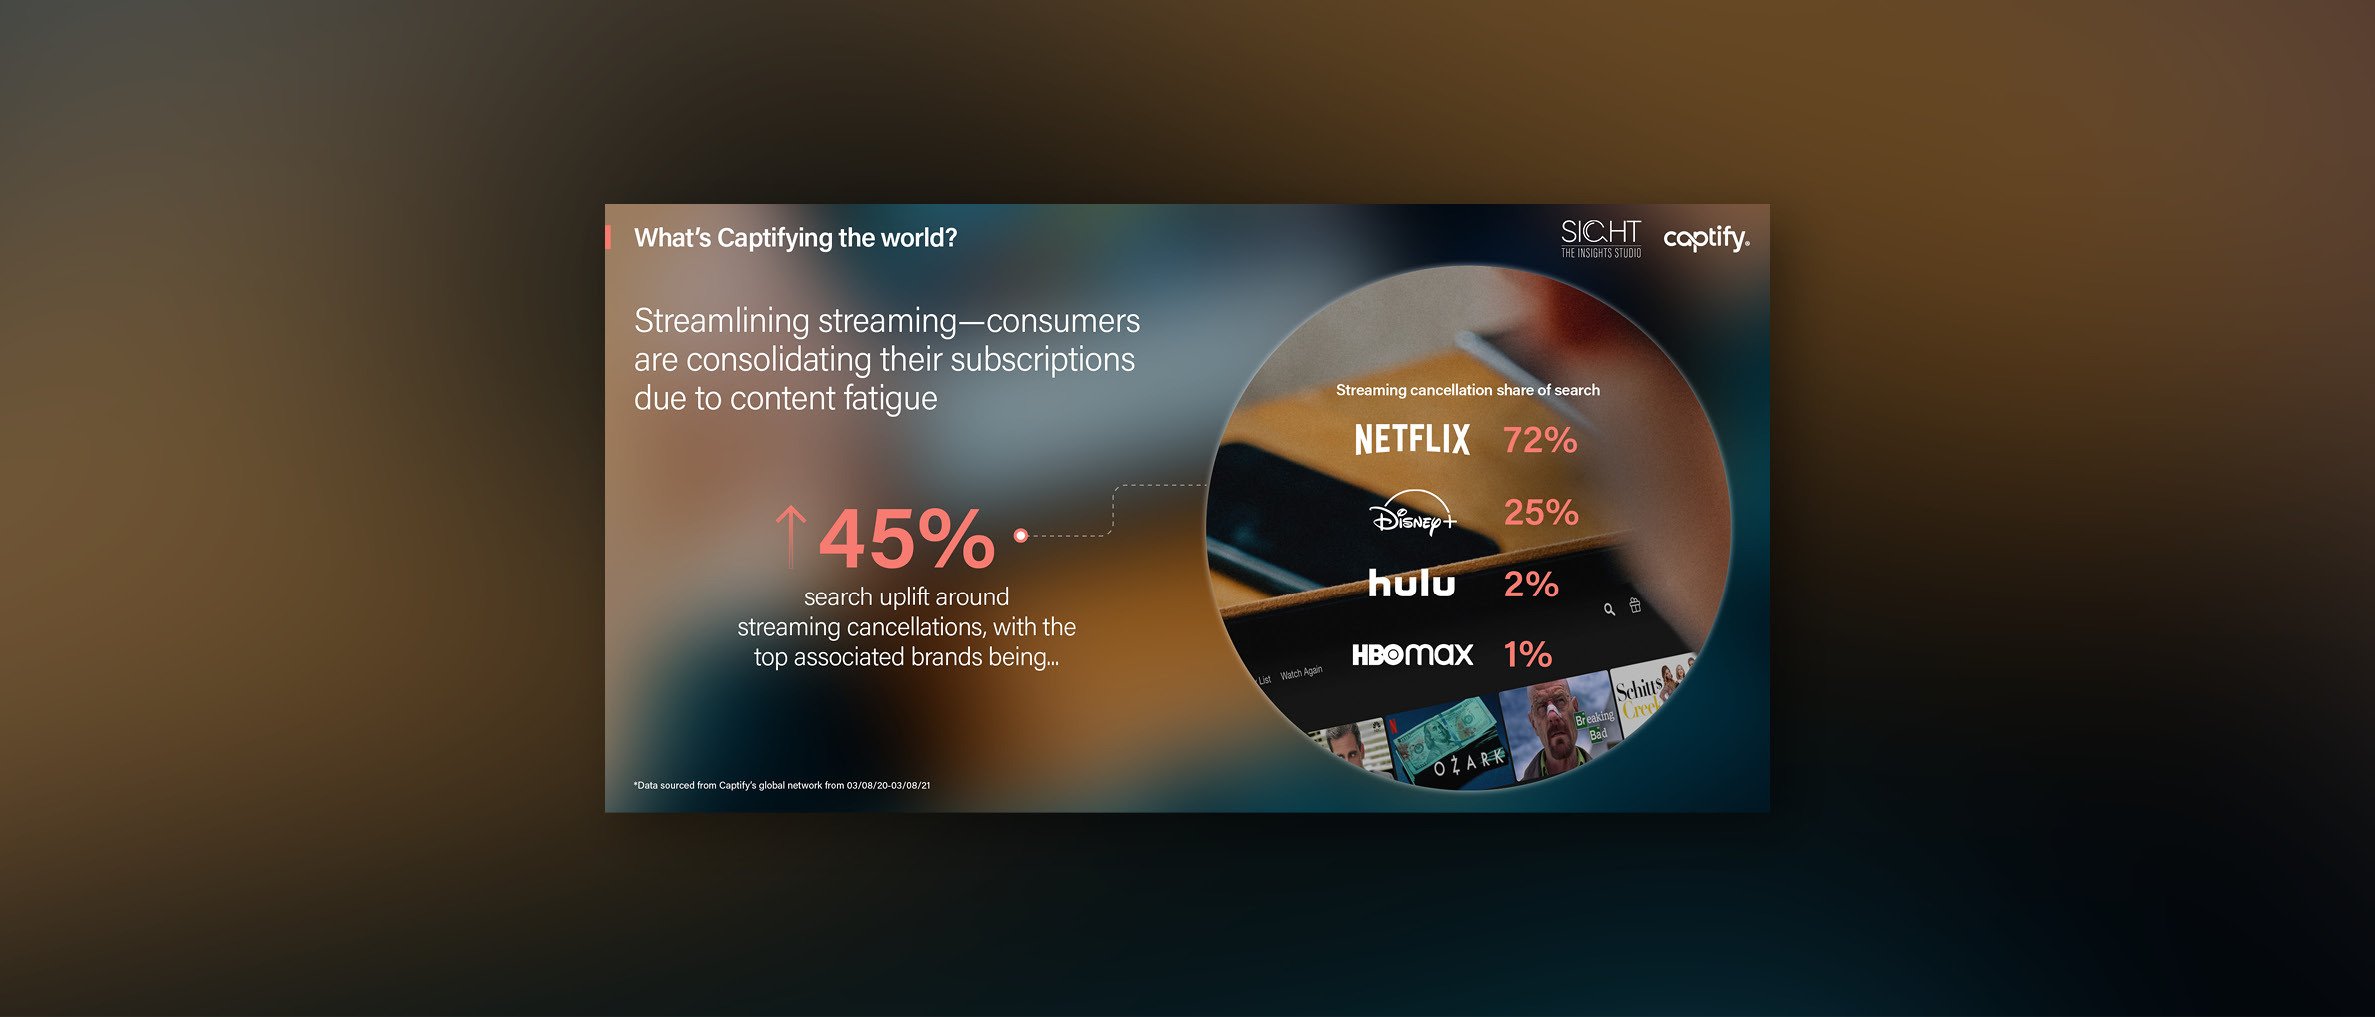 What’s Captifying the World: Streamlining streaming—consumers are consolidating their subscriptions due to content fatigue